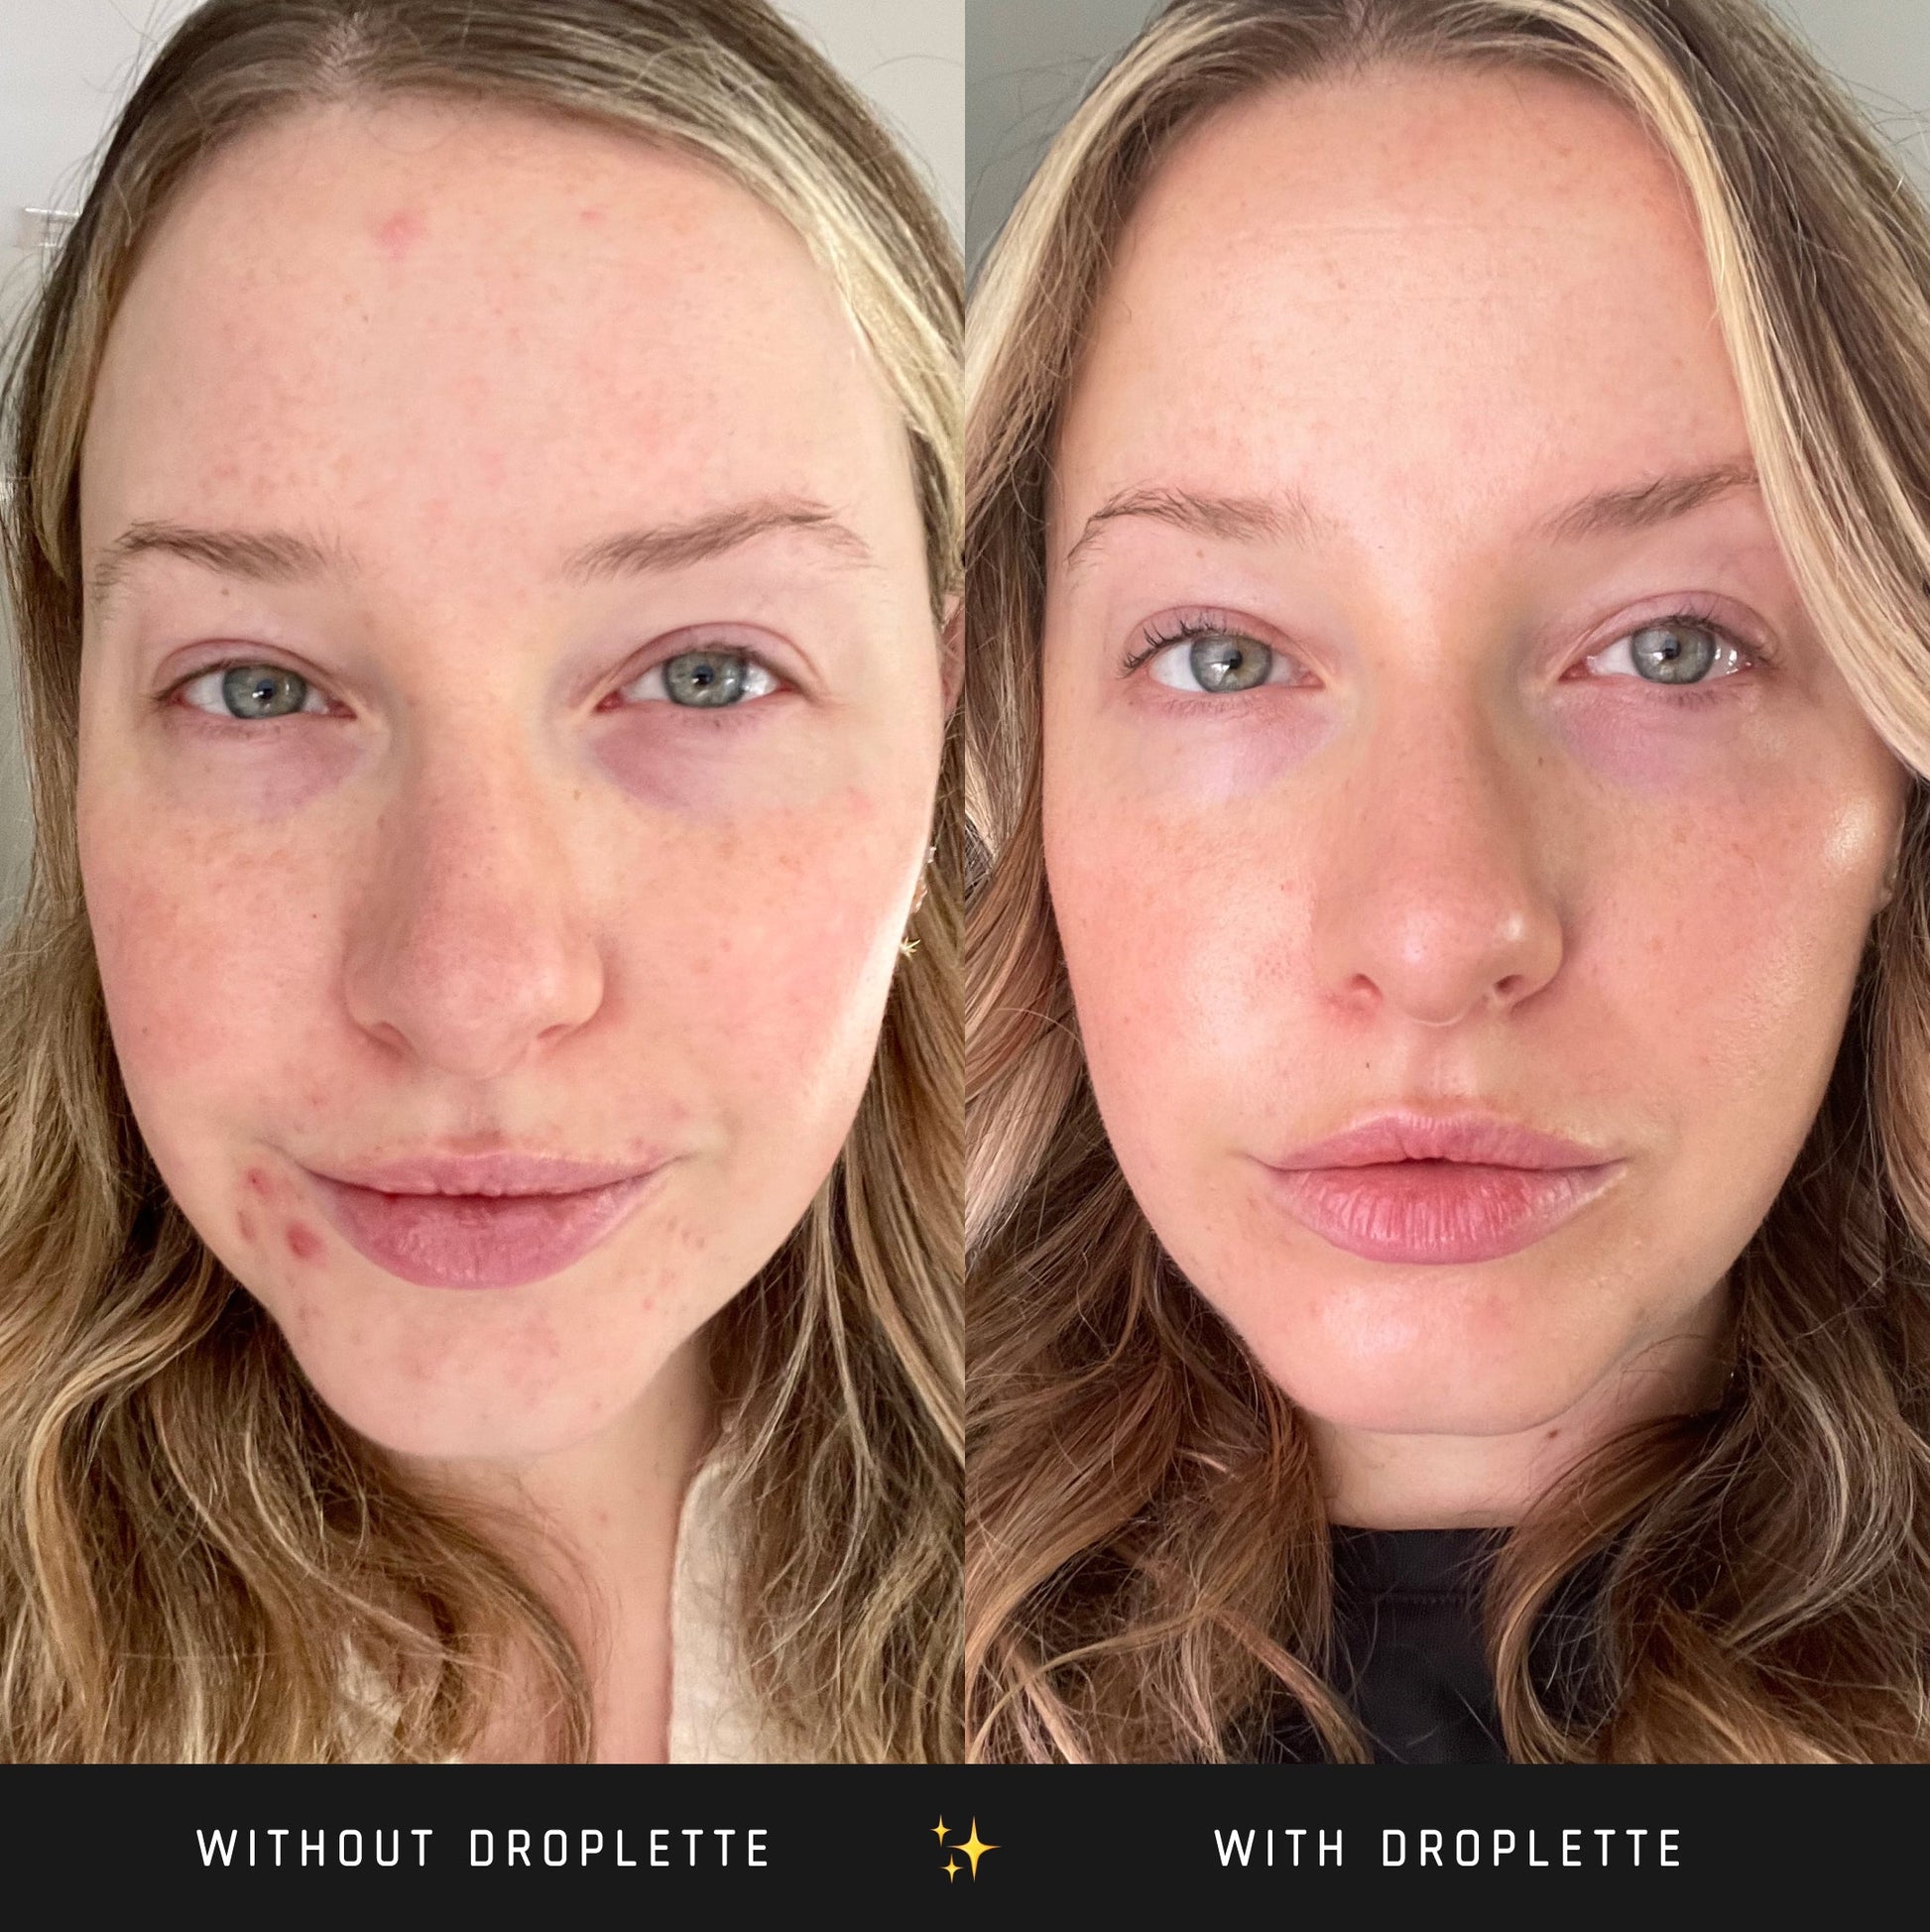 Droplette regimen before and after photos with improved skin appearance